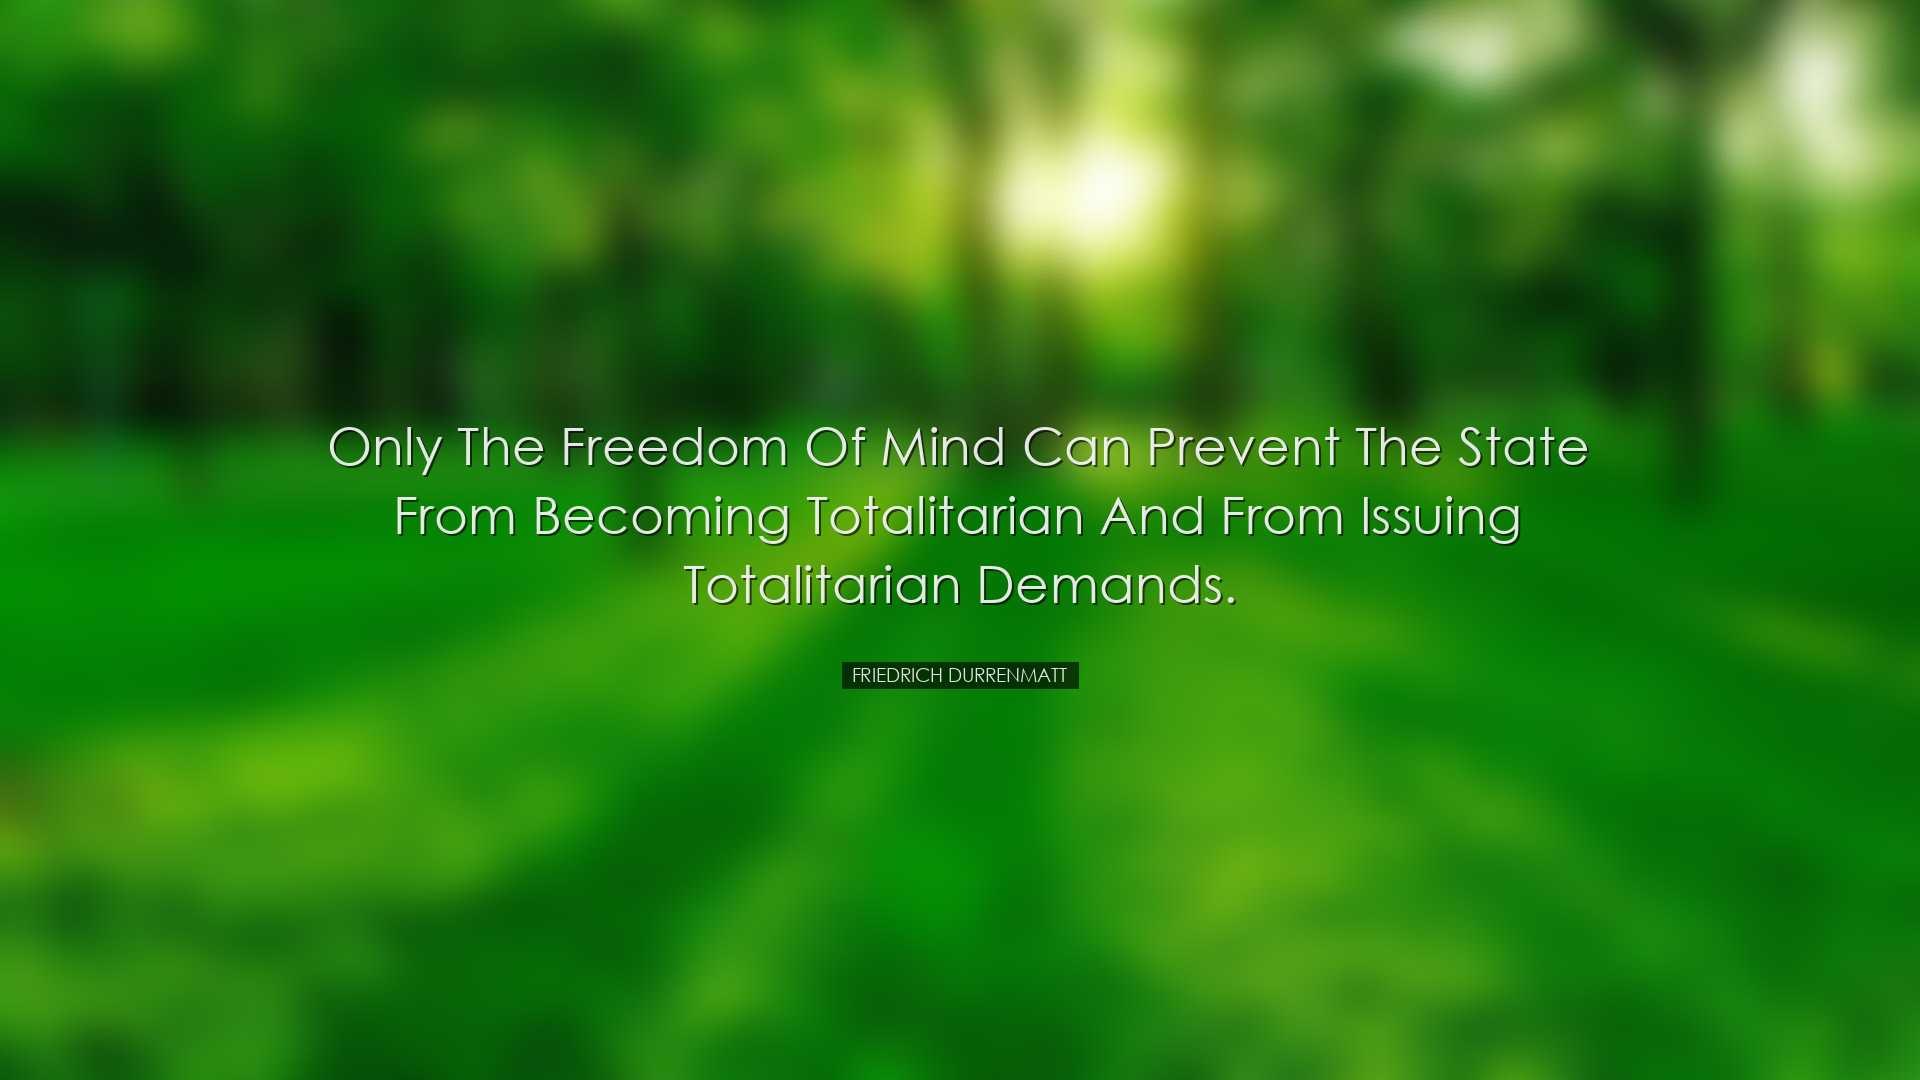 Only the freedom of mind can prevent the state from becoming total